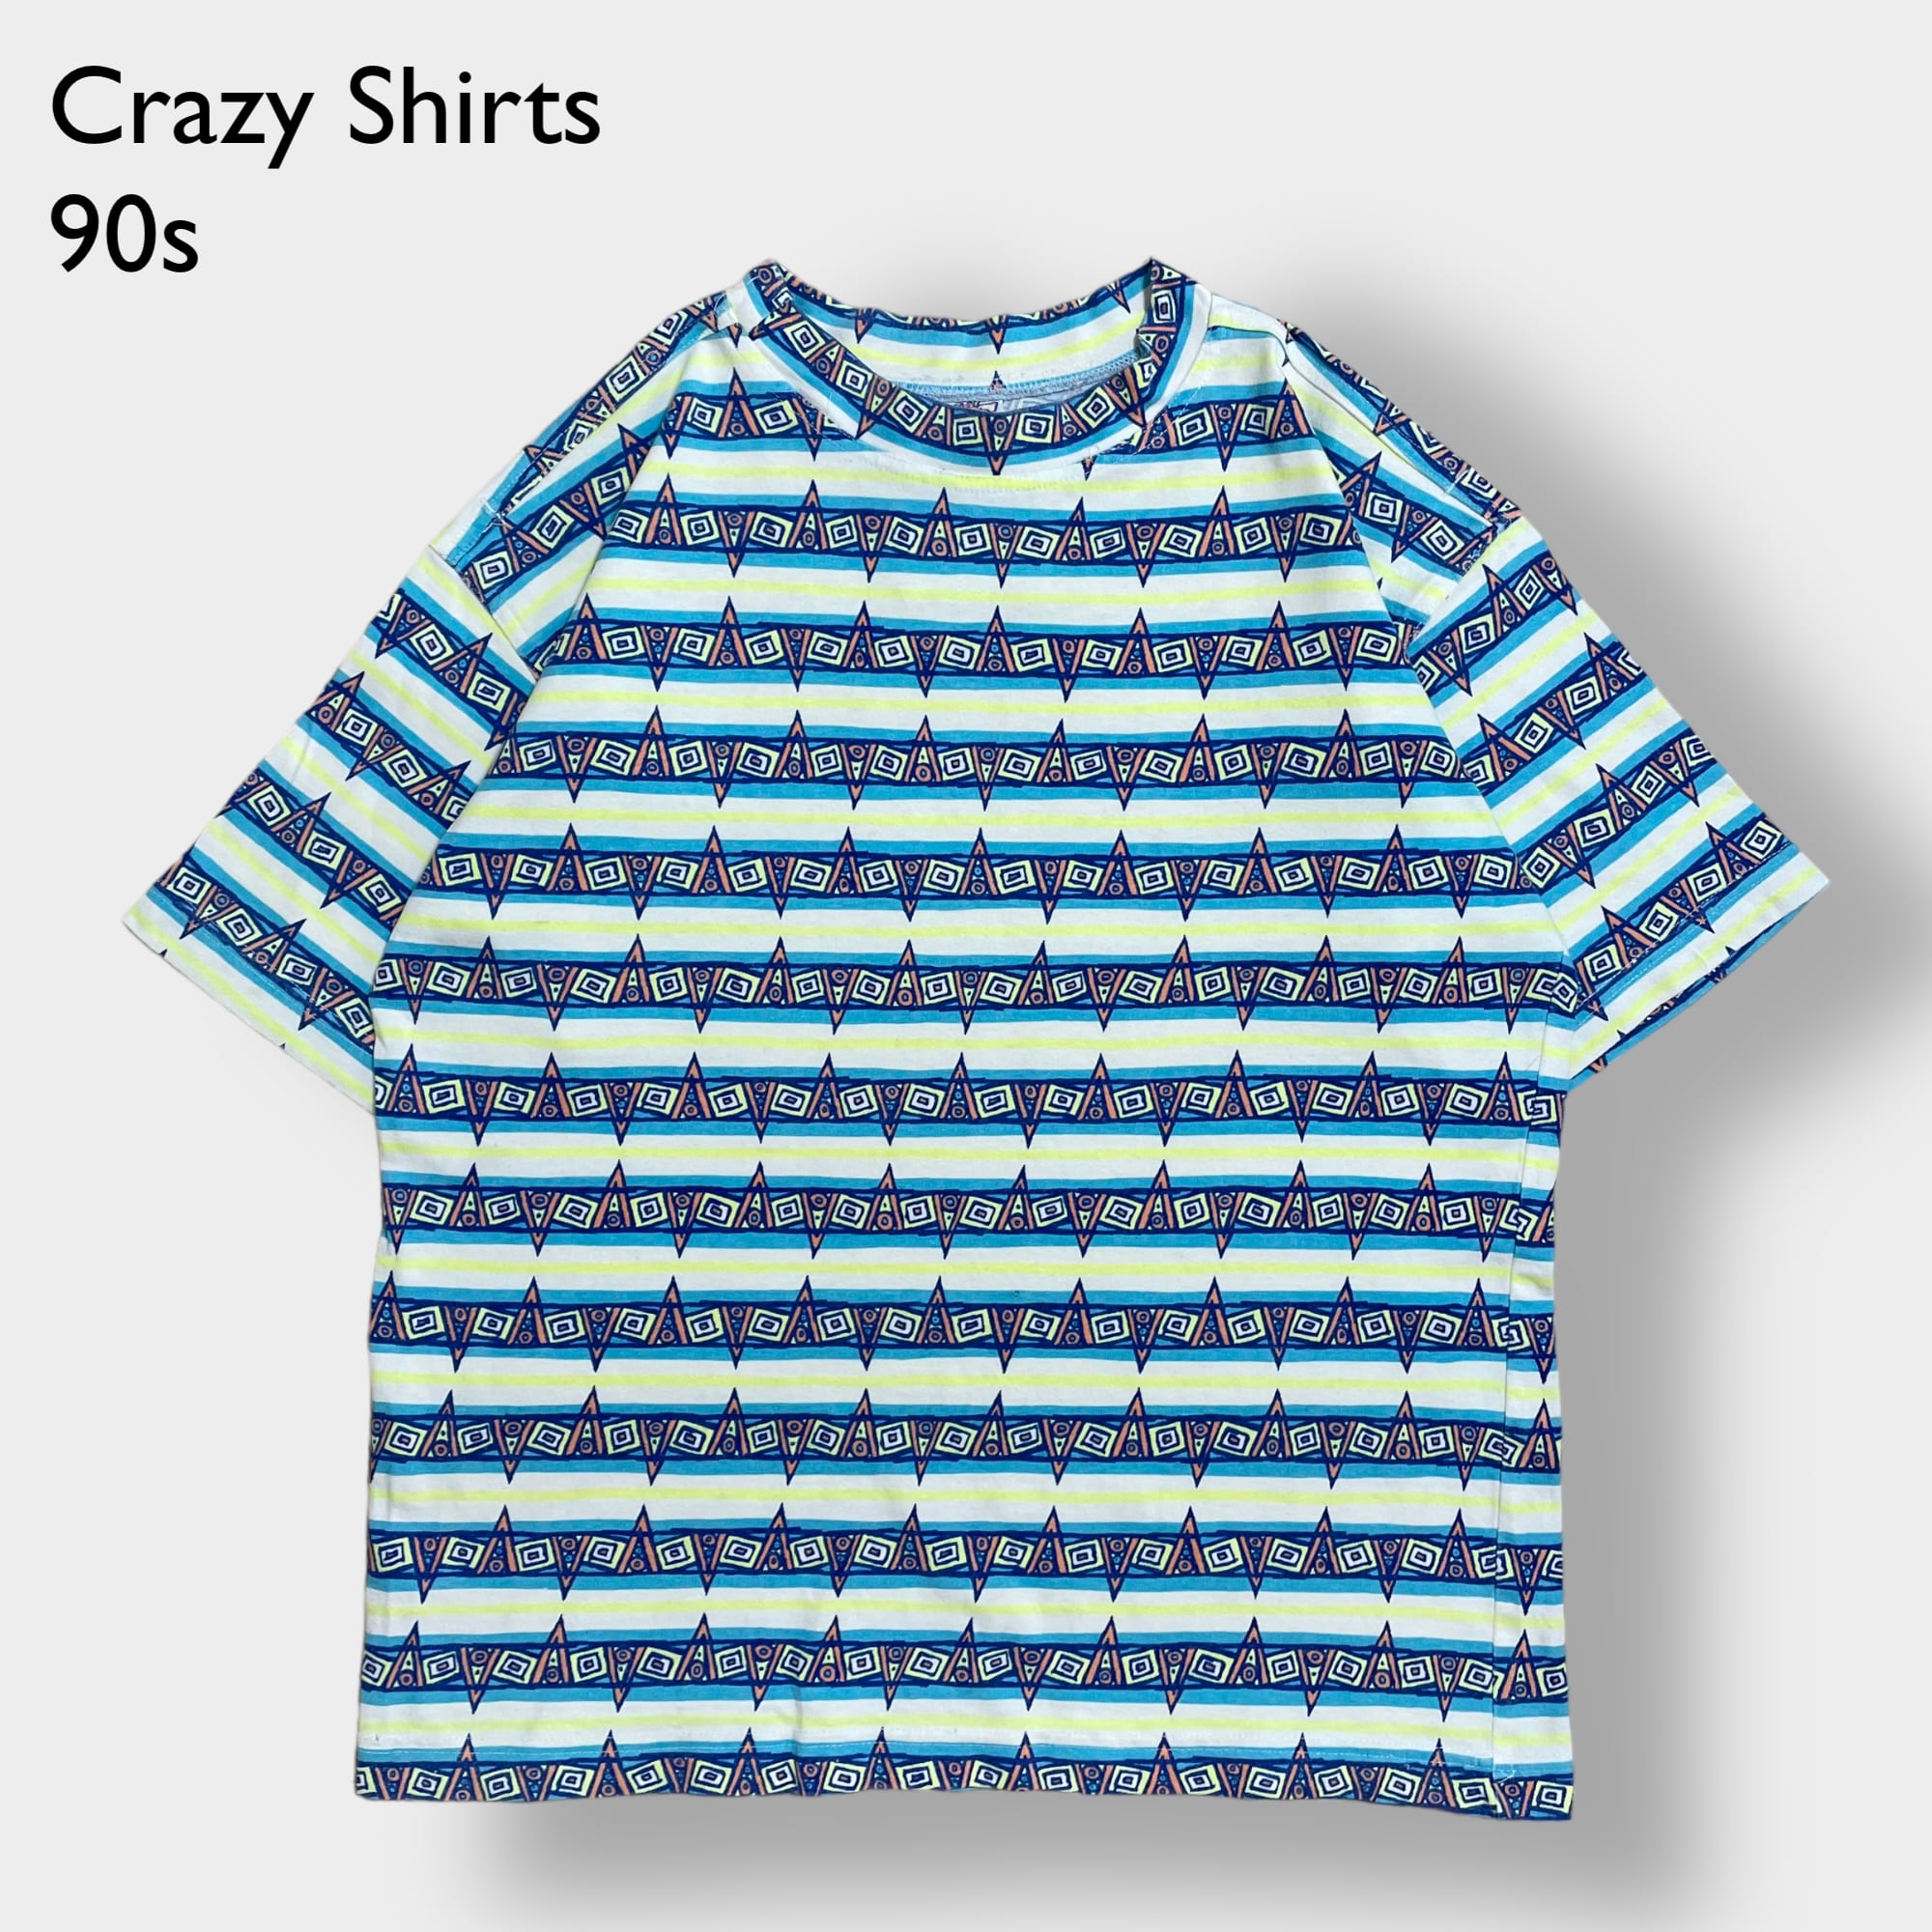 【Crazy Shirts】90s USA製 ロゴ 総柄 オールパターン Tシャツ ...